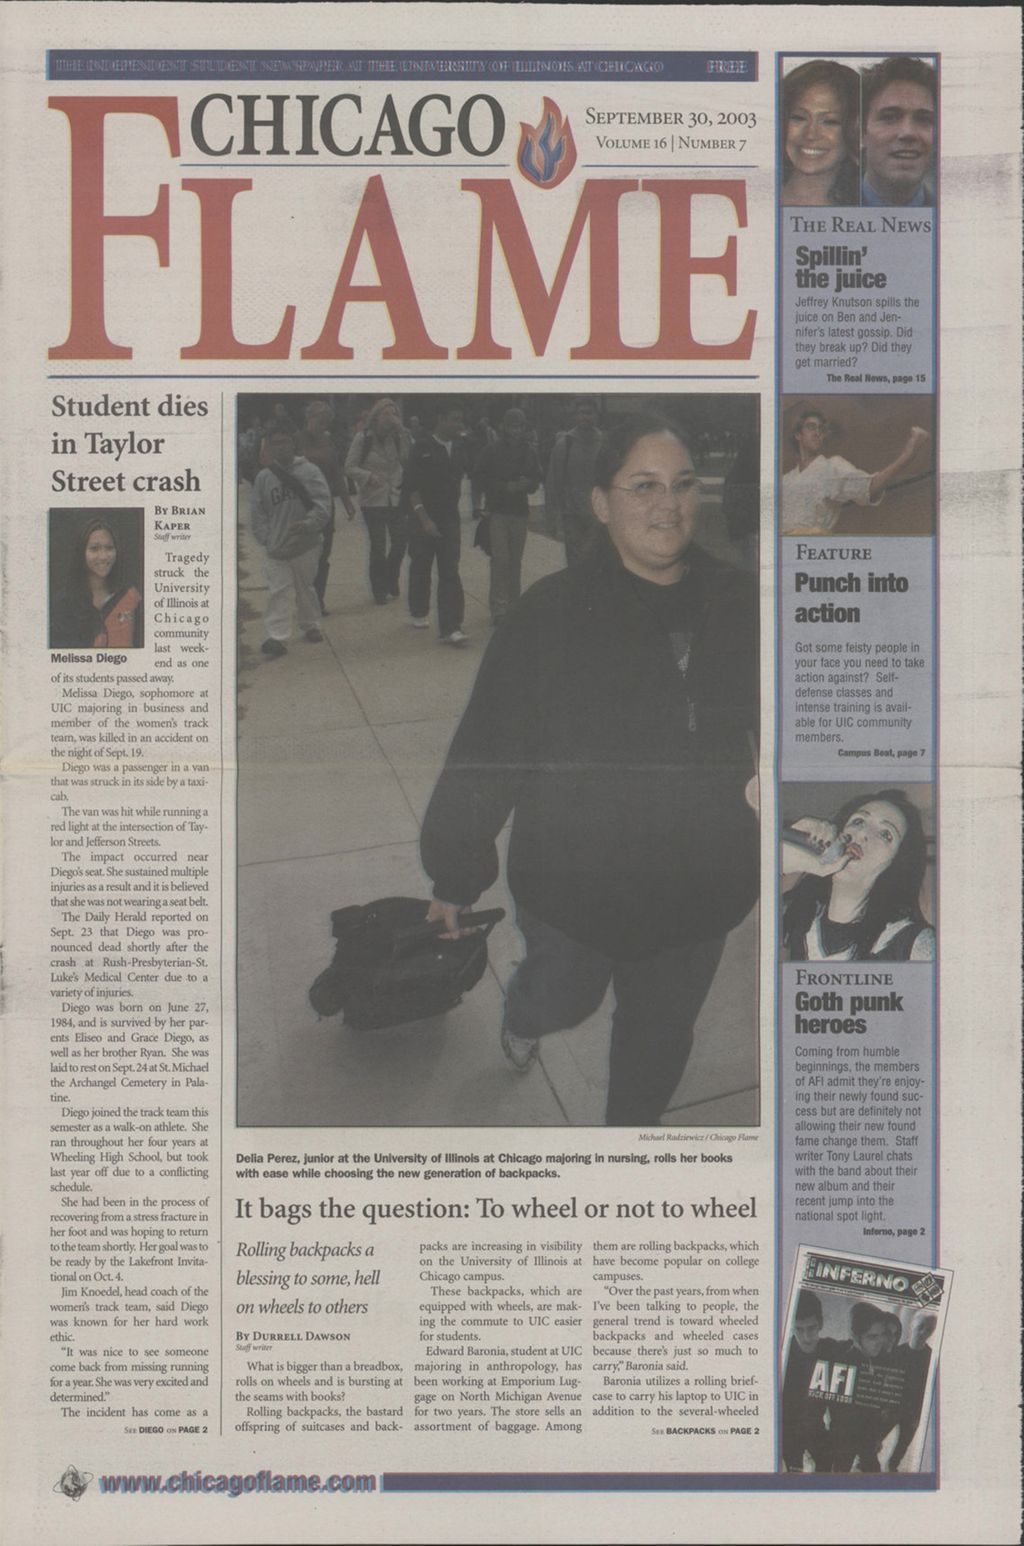 Miniature of Chicago Flame (September 30, 2003)